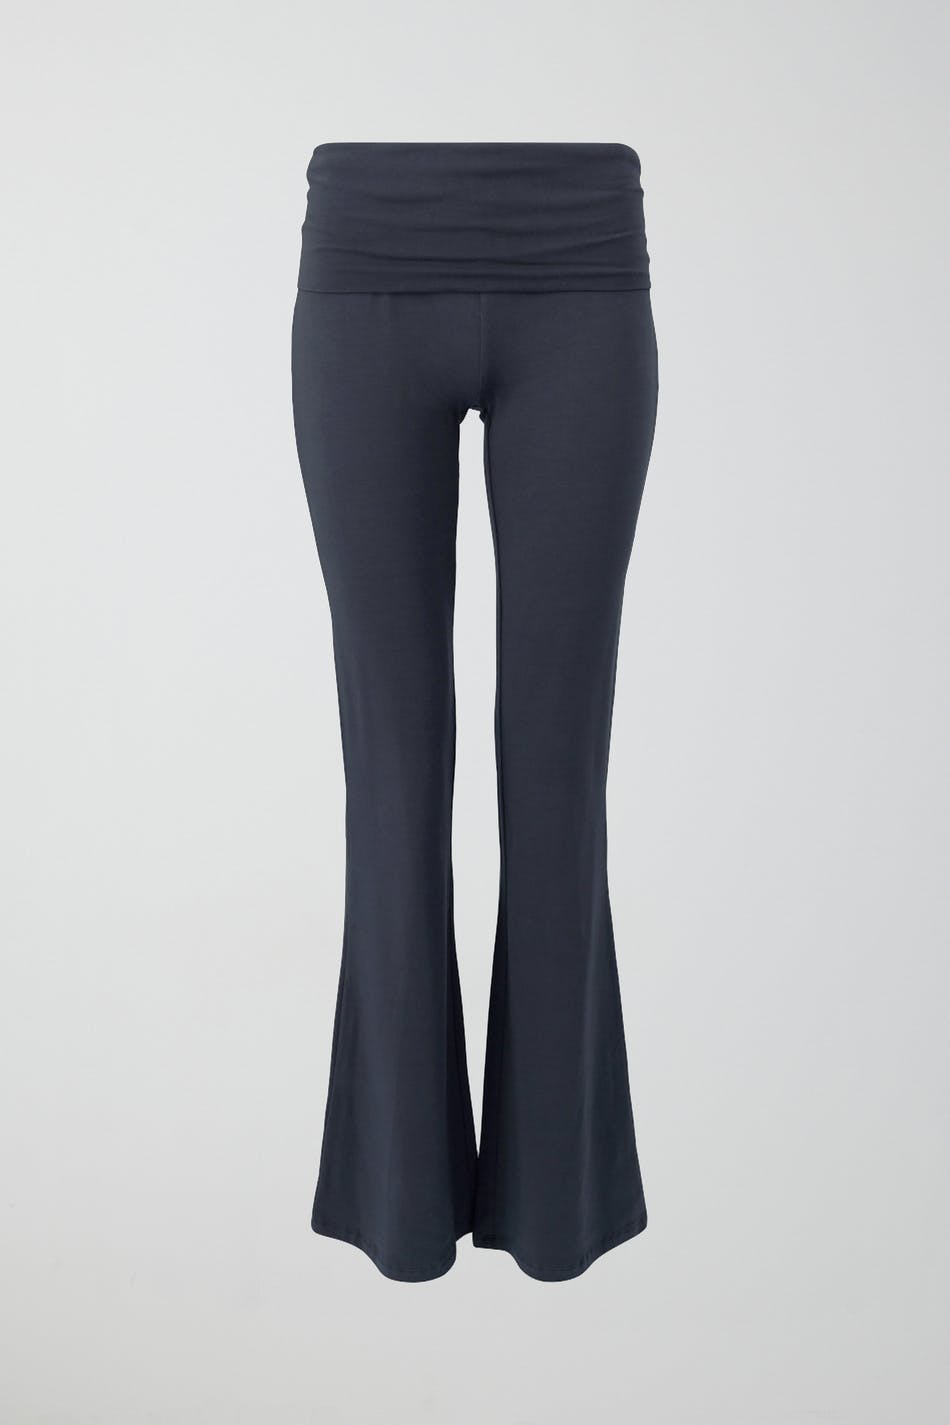 Gina Tricot - Soft touch tall folded flare trousers - yoga-pants - Grey - XXS - Female